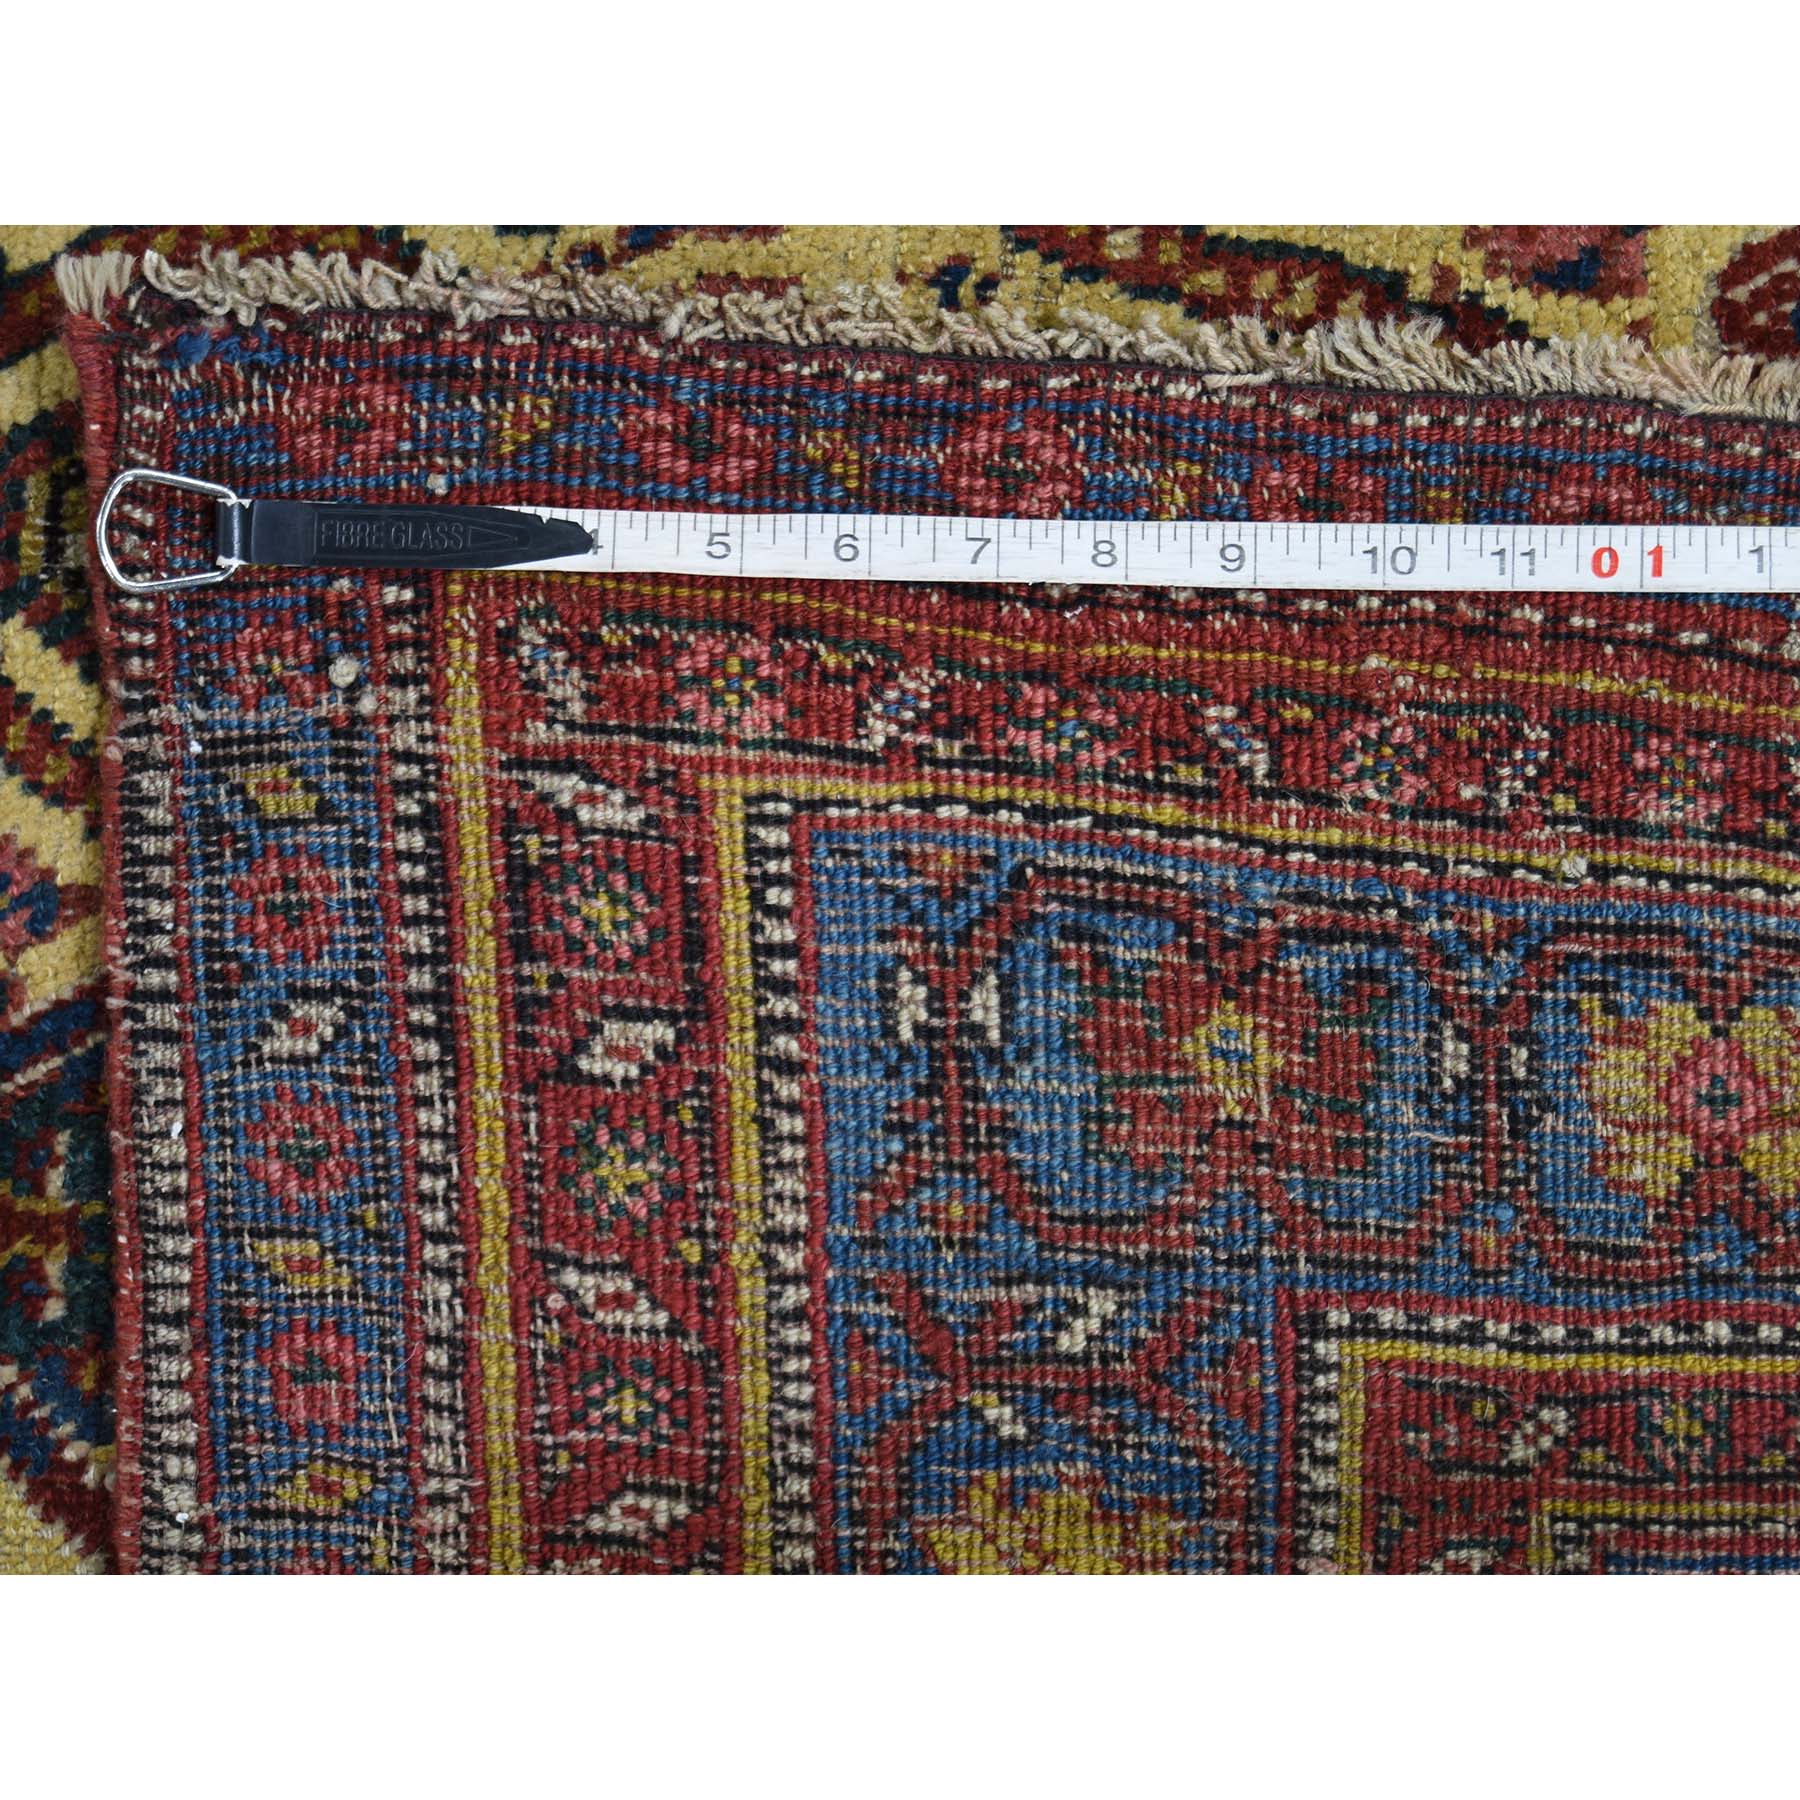 7-2 x20-1  Antique Persian Gallery Size Runner Bijar Pure Wool Hand-Knotted Oriental Rug 